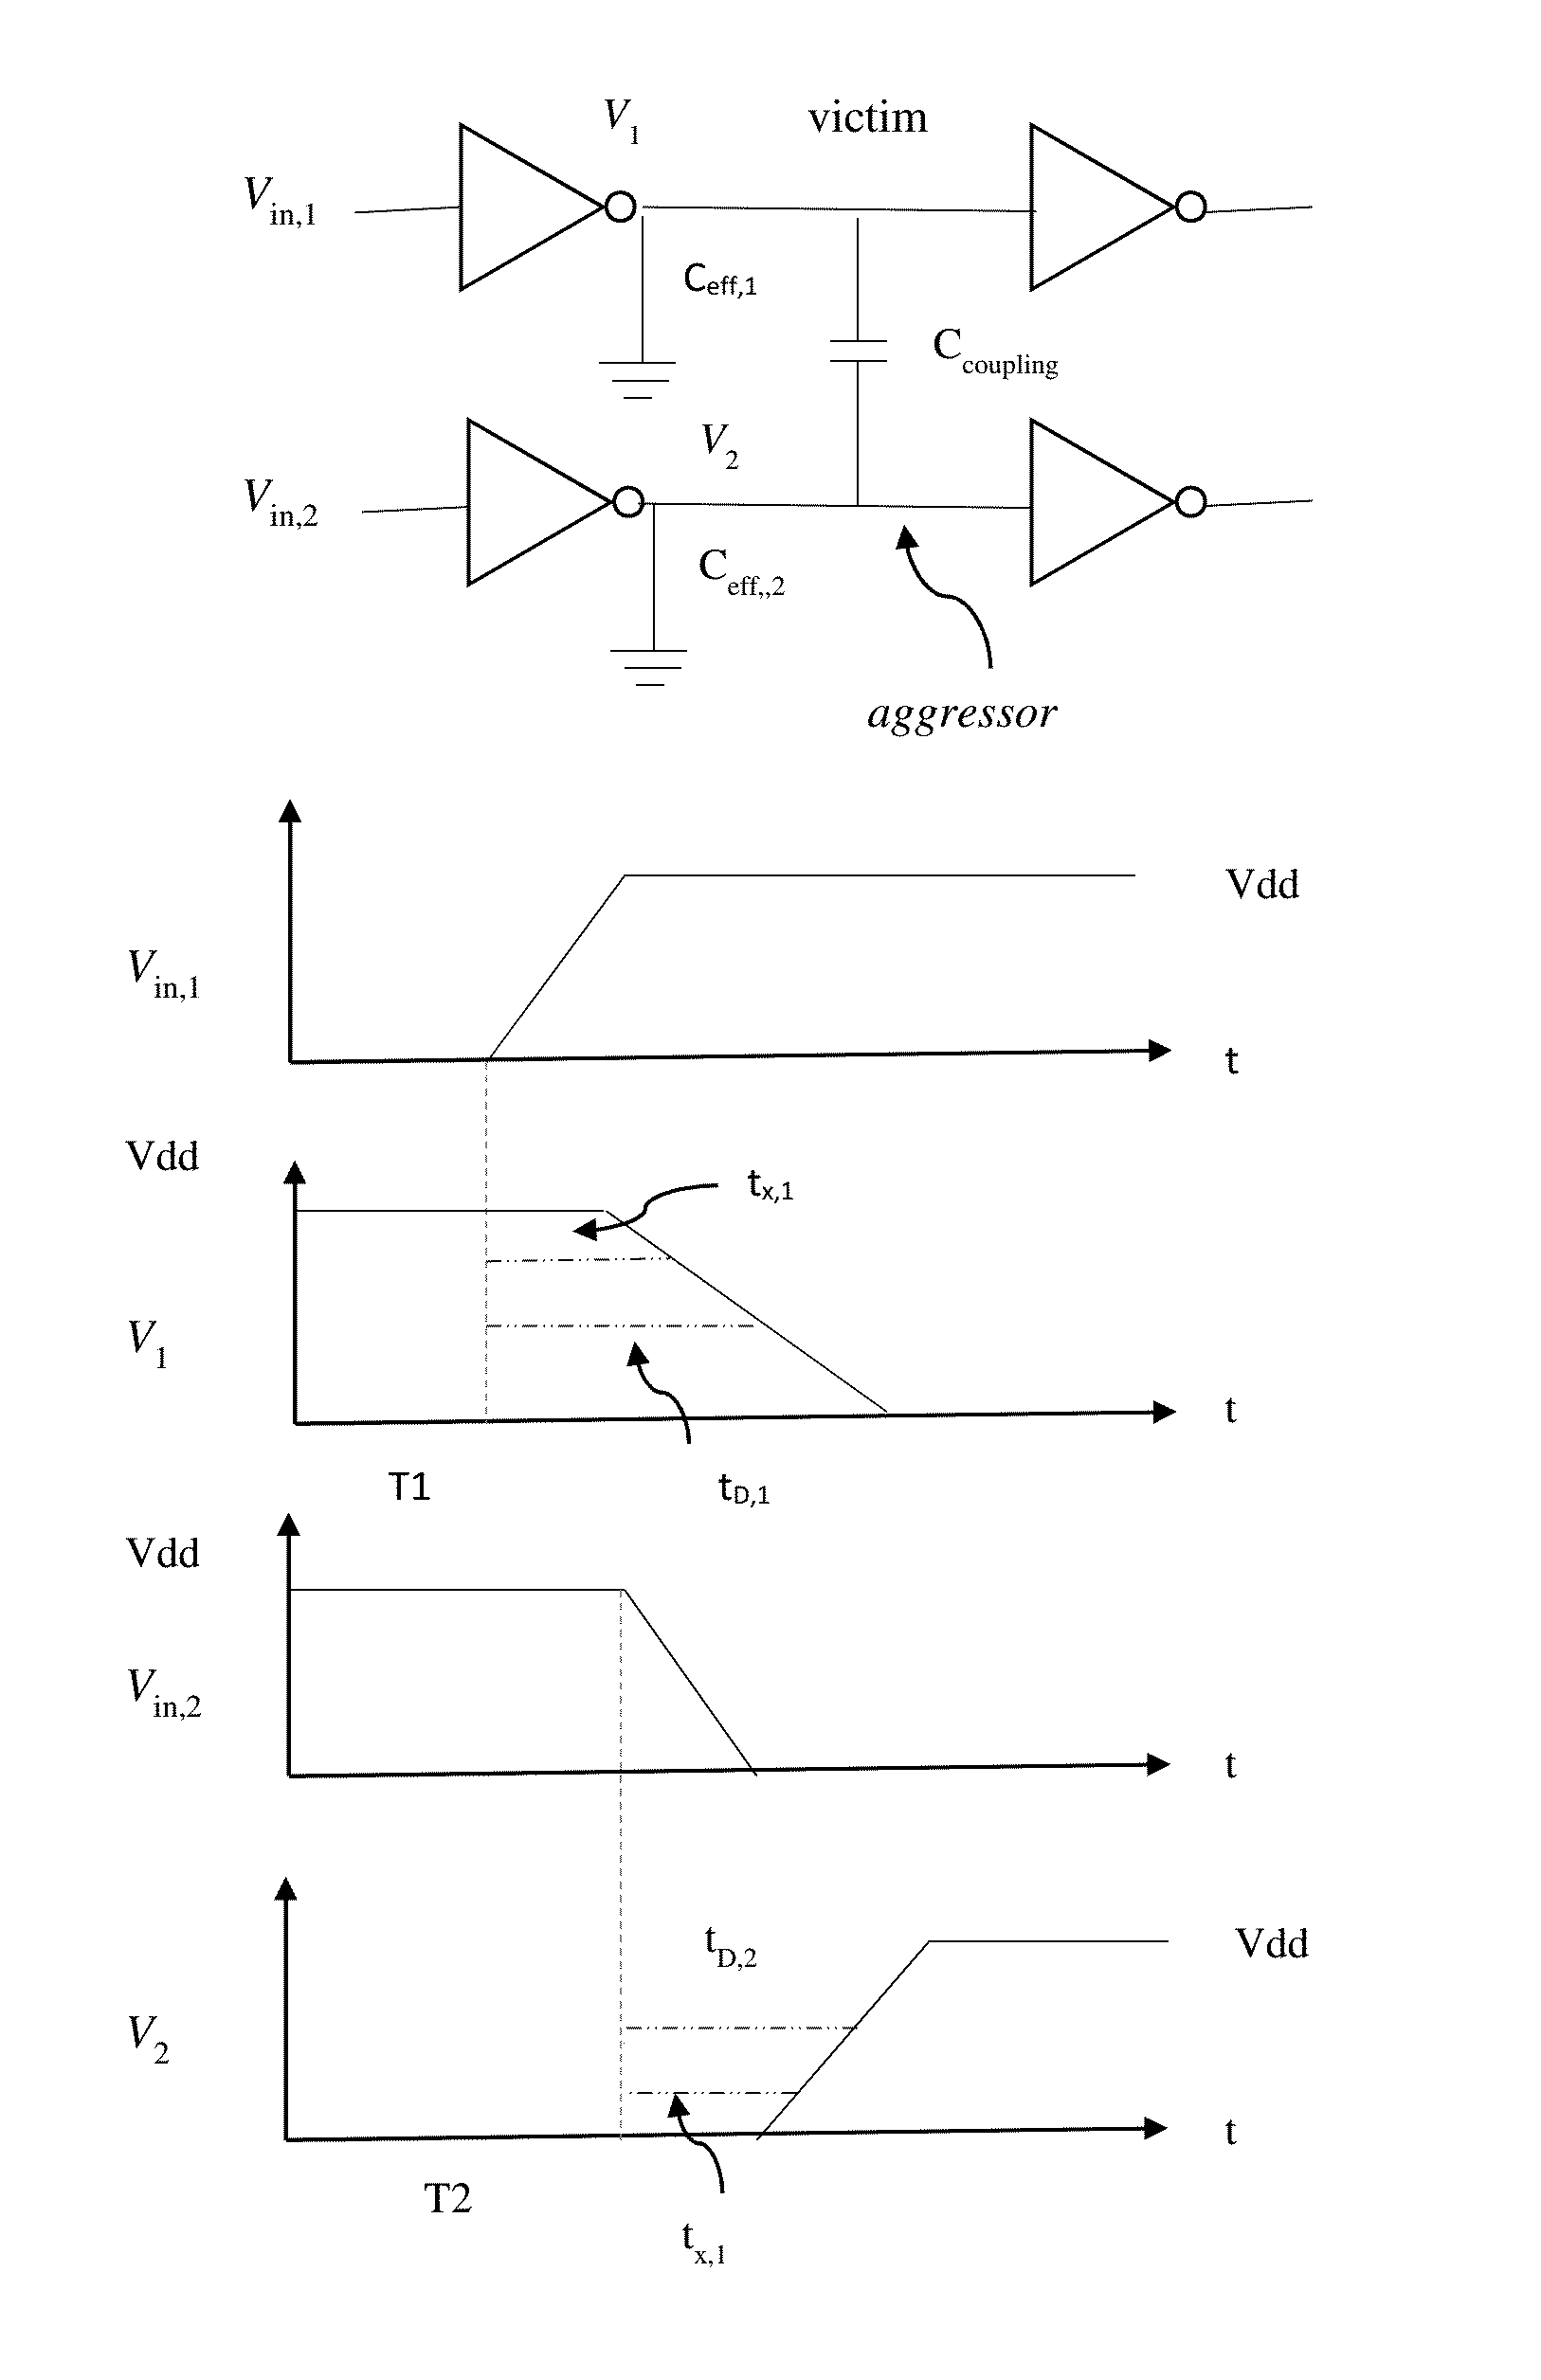 Ssta with non-gaussian variation to second order for multi-phase sequential circuit with interconnect effect